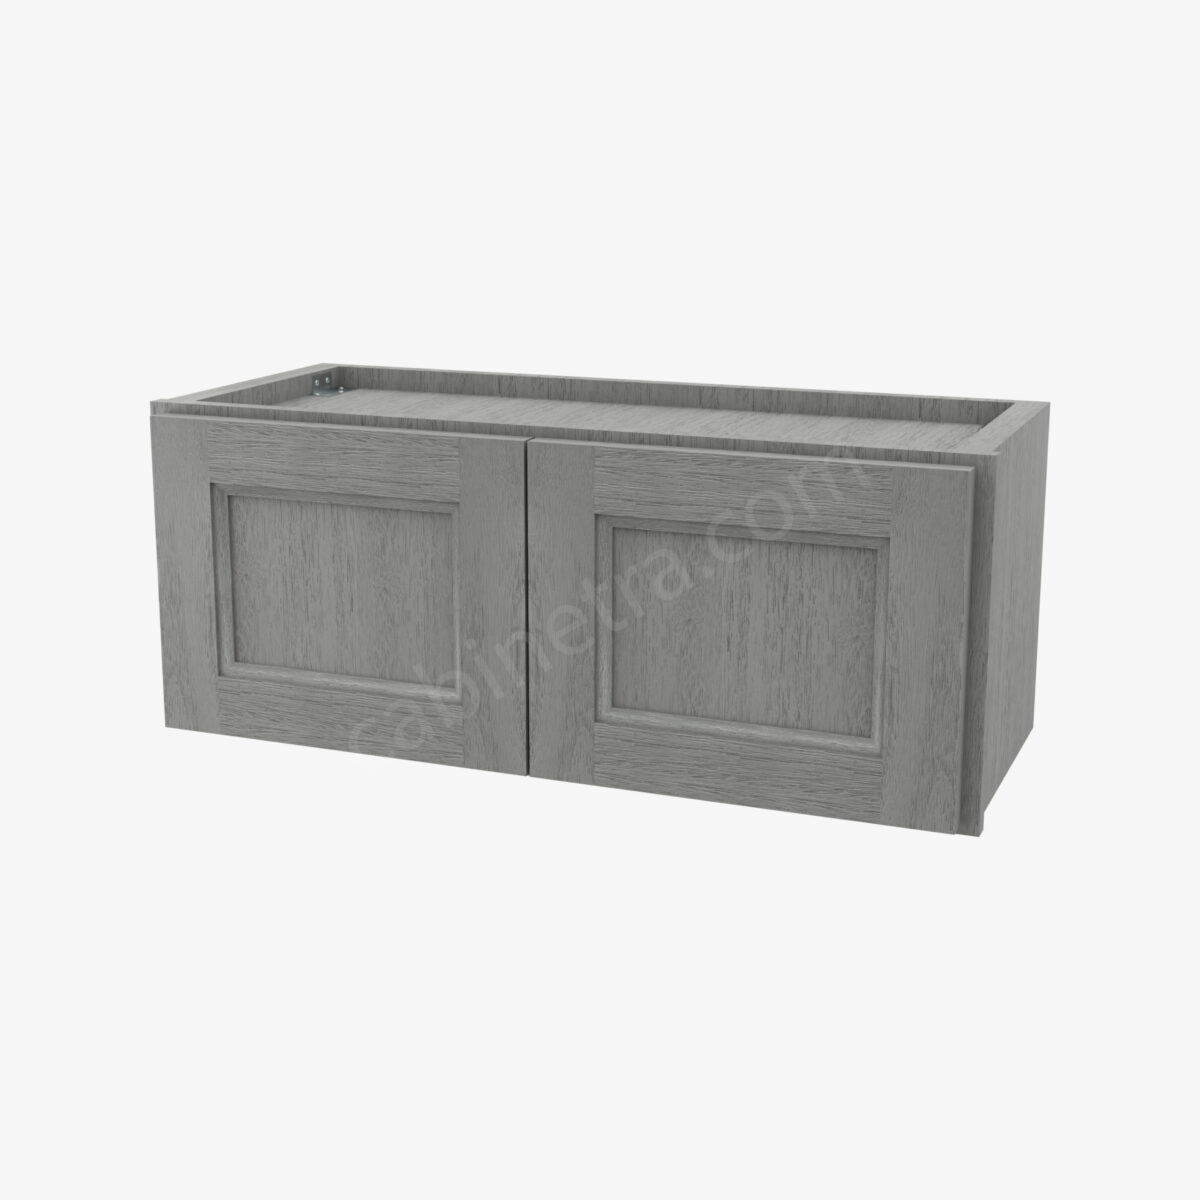 TG W3012B 0 Forevermark Midtown Grey Cabinetra scaled